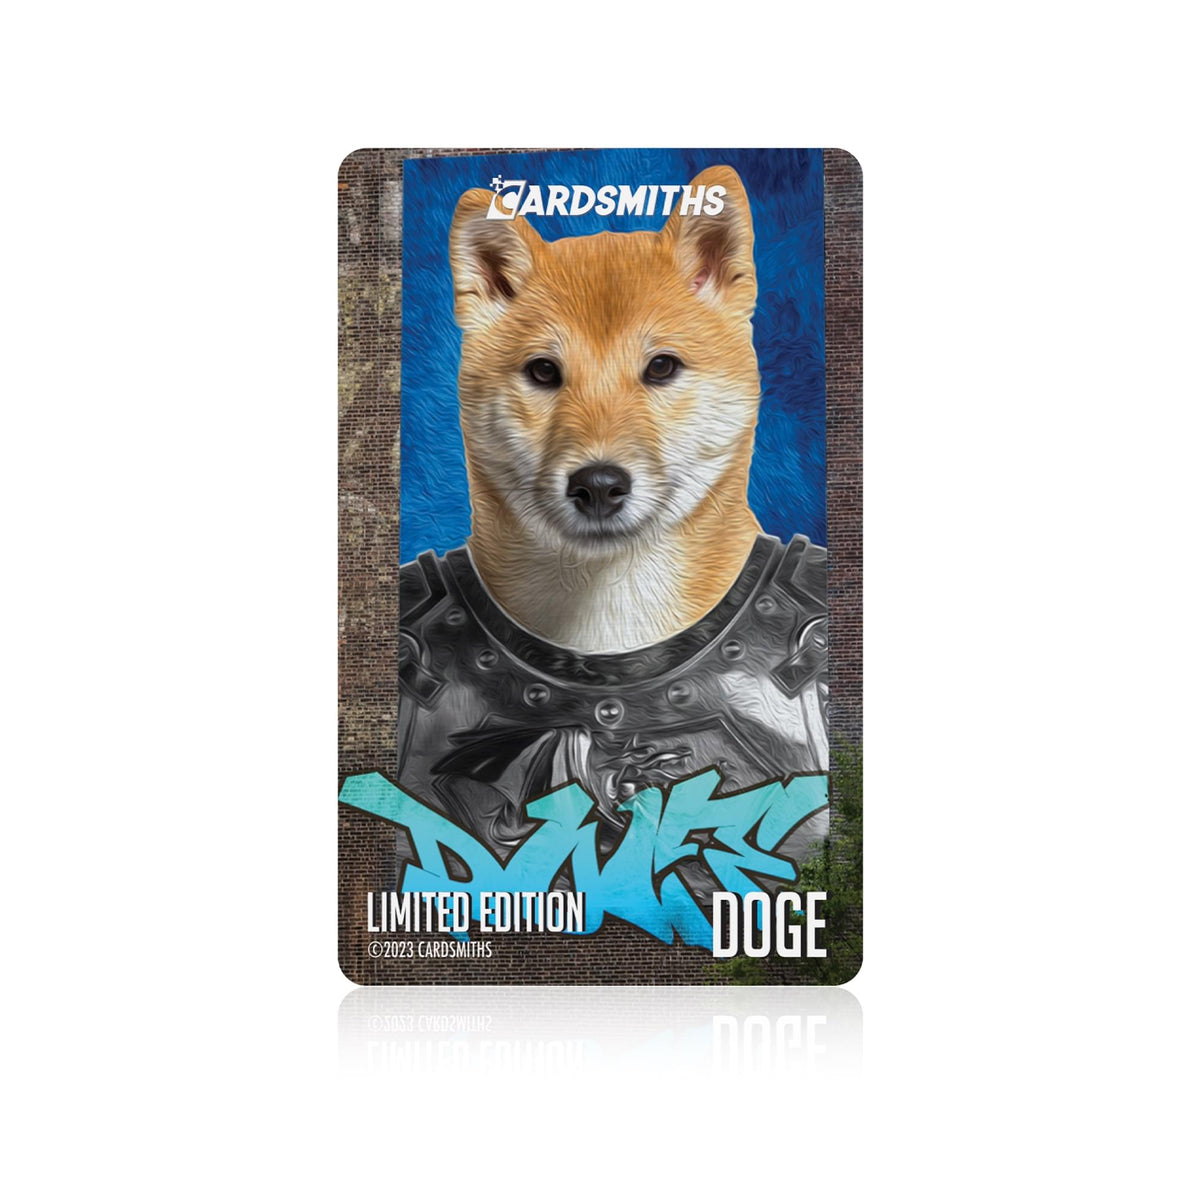 Cardsmiths Dogecoin Ballet Limited Edition Wallet Card